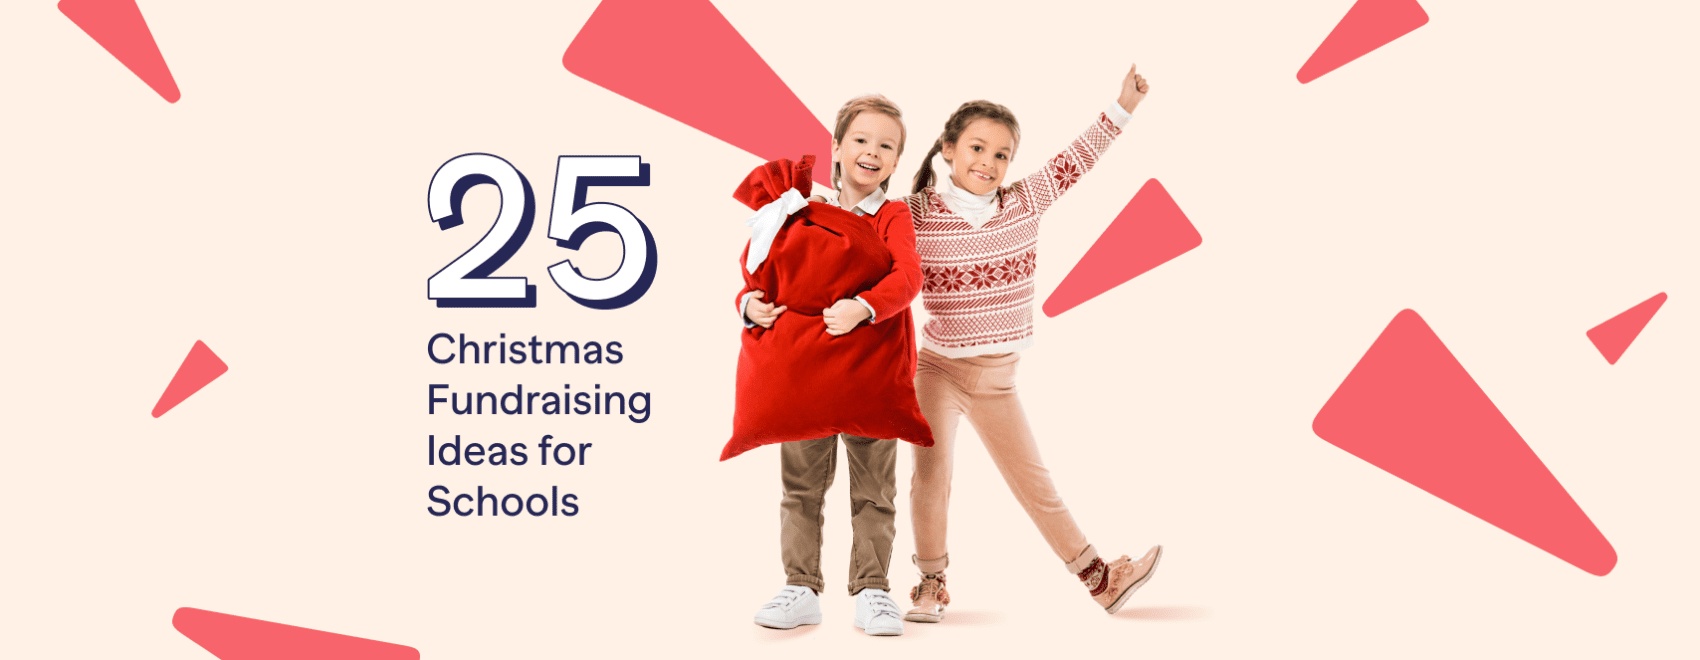 Christmas fundraising ideas for schools